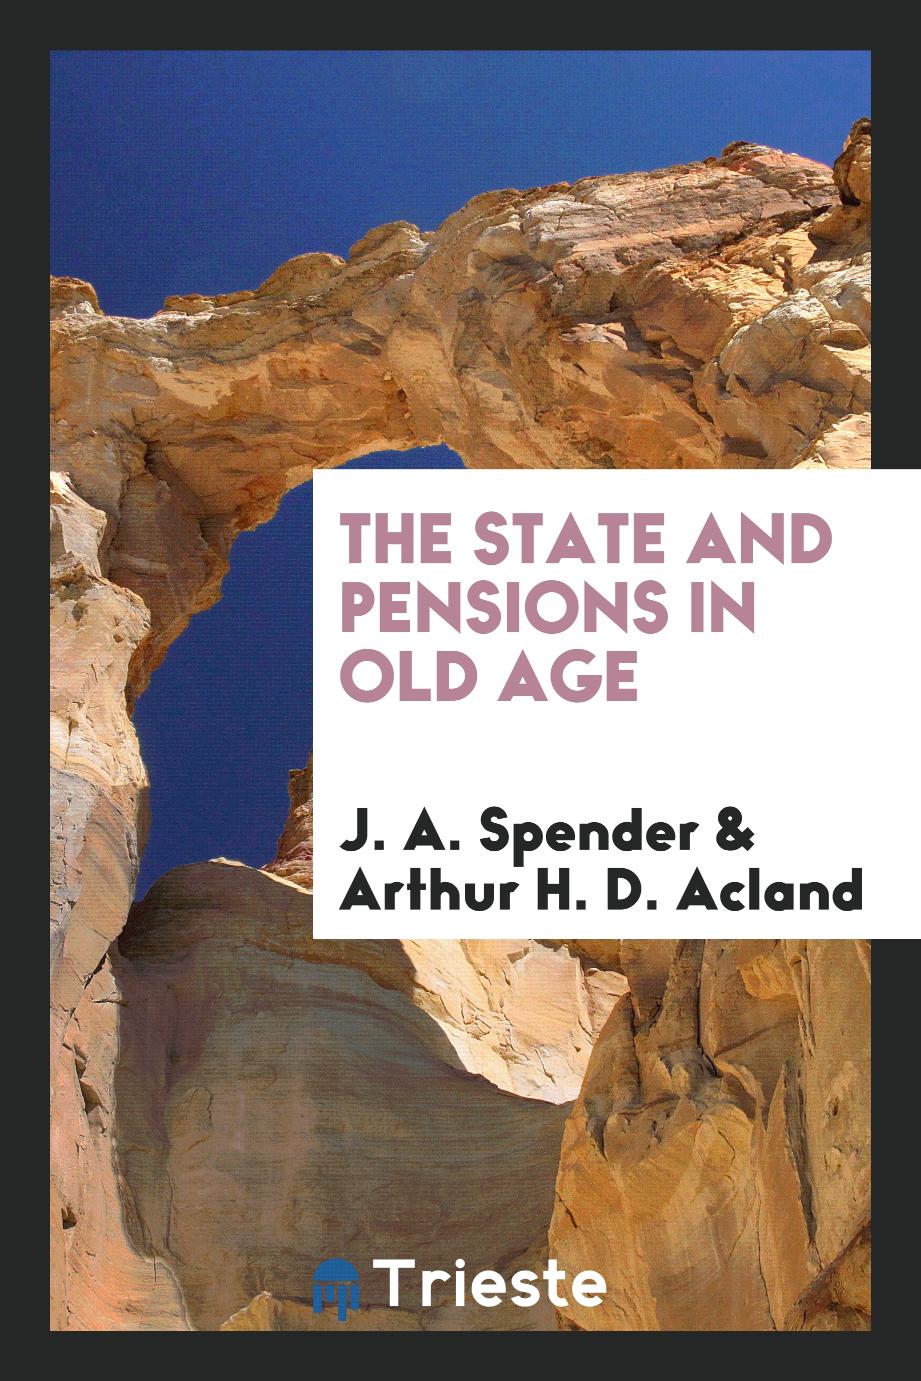 The State and Pensions in Old Age